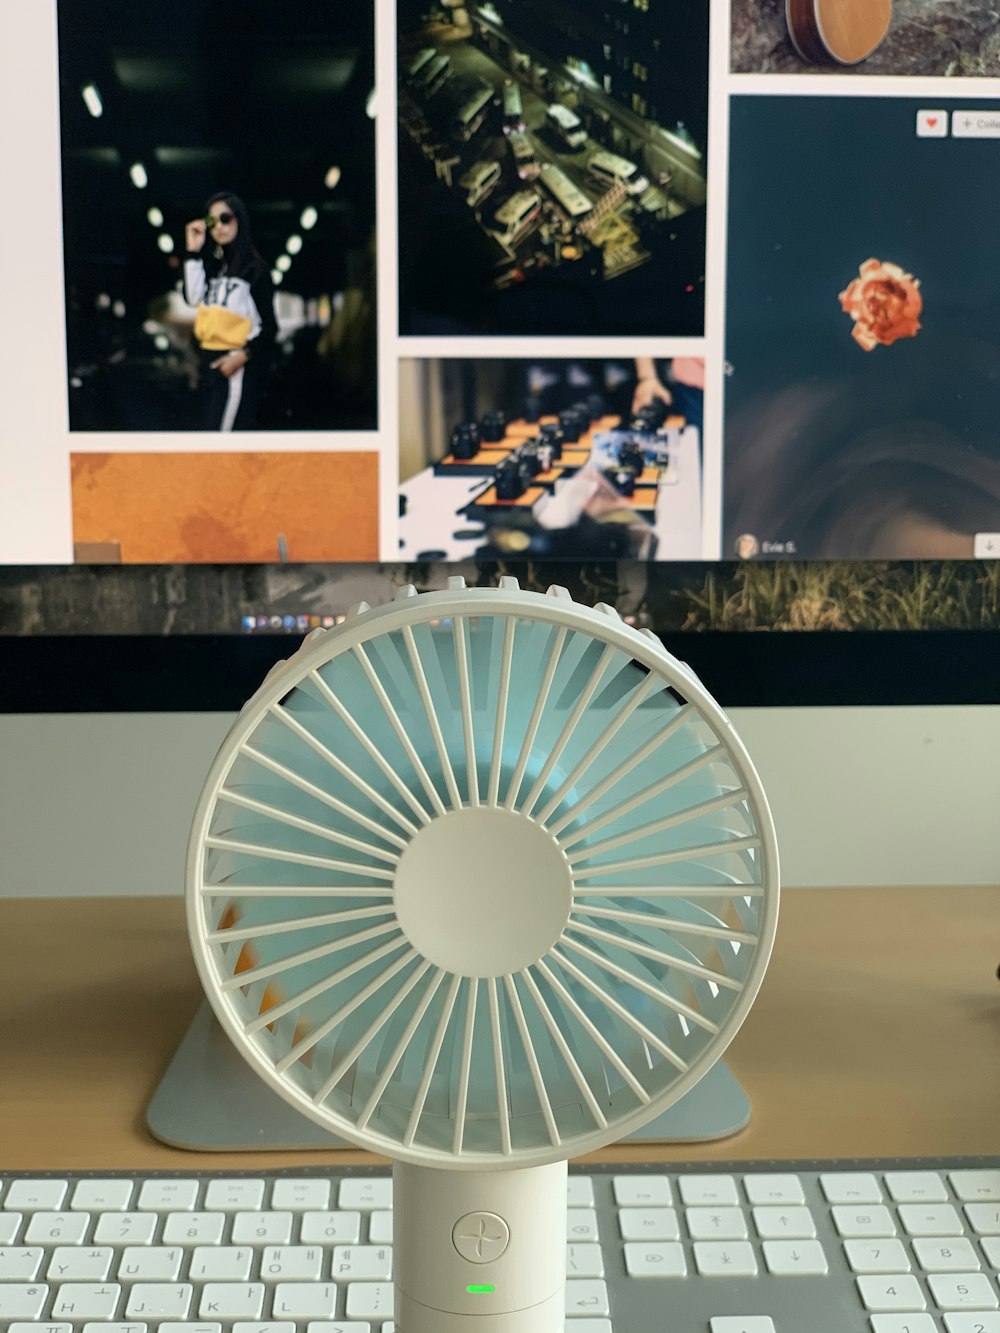 turned-on white and blue fan on table